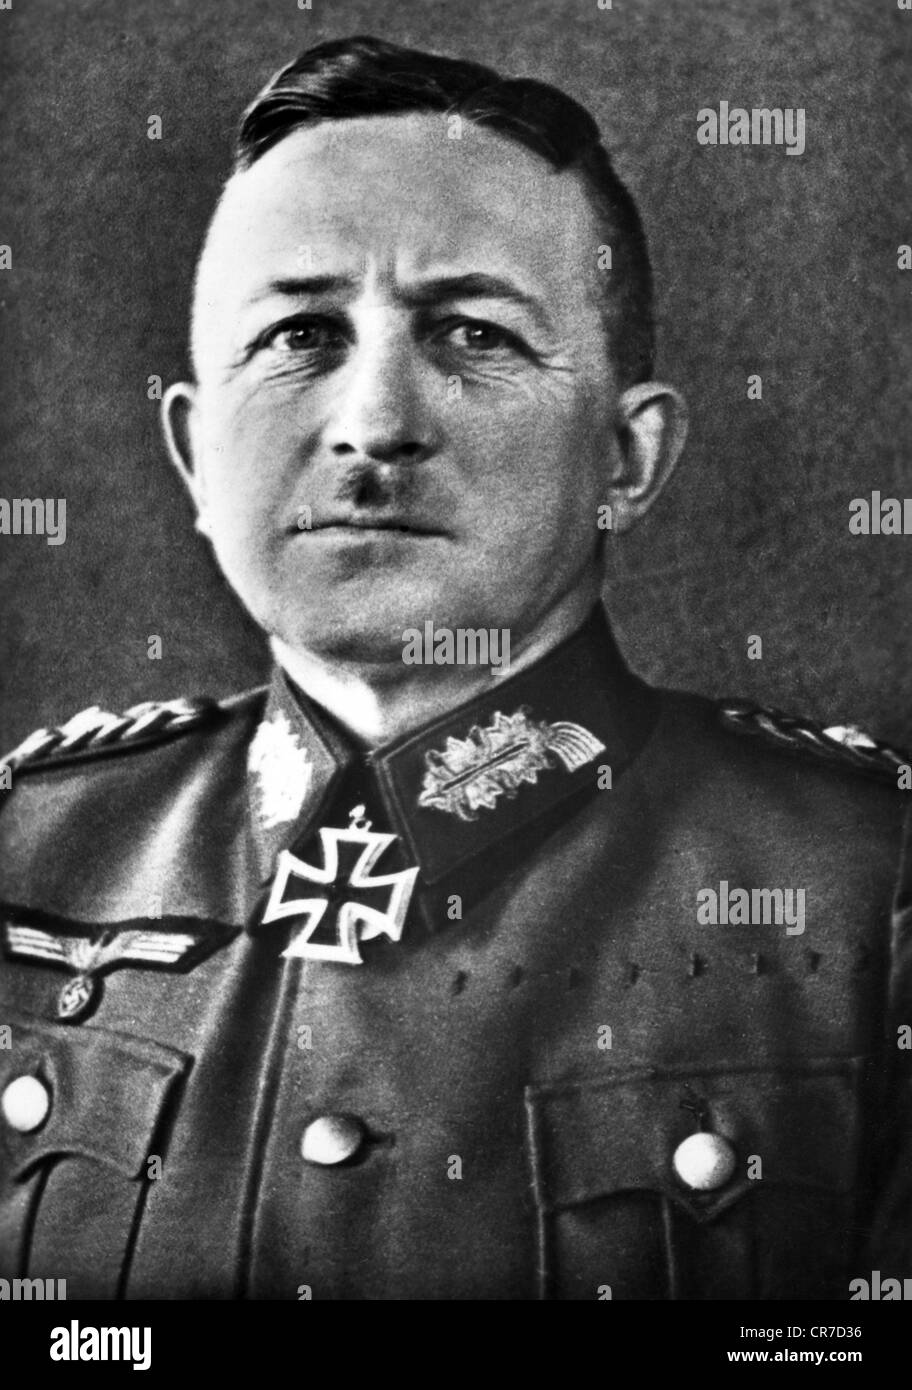 Knobelsdorff, Otto von, 31.3.1886 - 21.10.1966, German general, portrait, as Knight's Cross recipient and commander of 19th Panzer Division, late 1941, Stock Photo